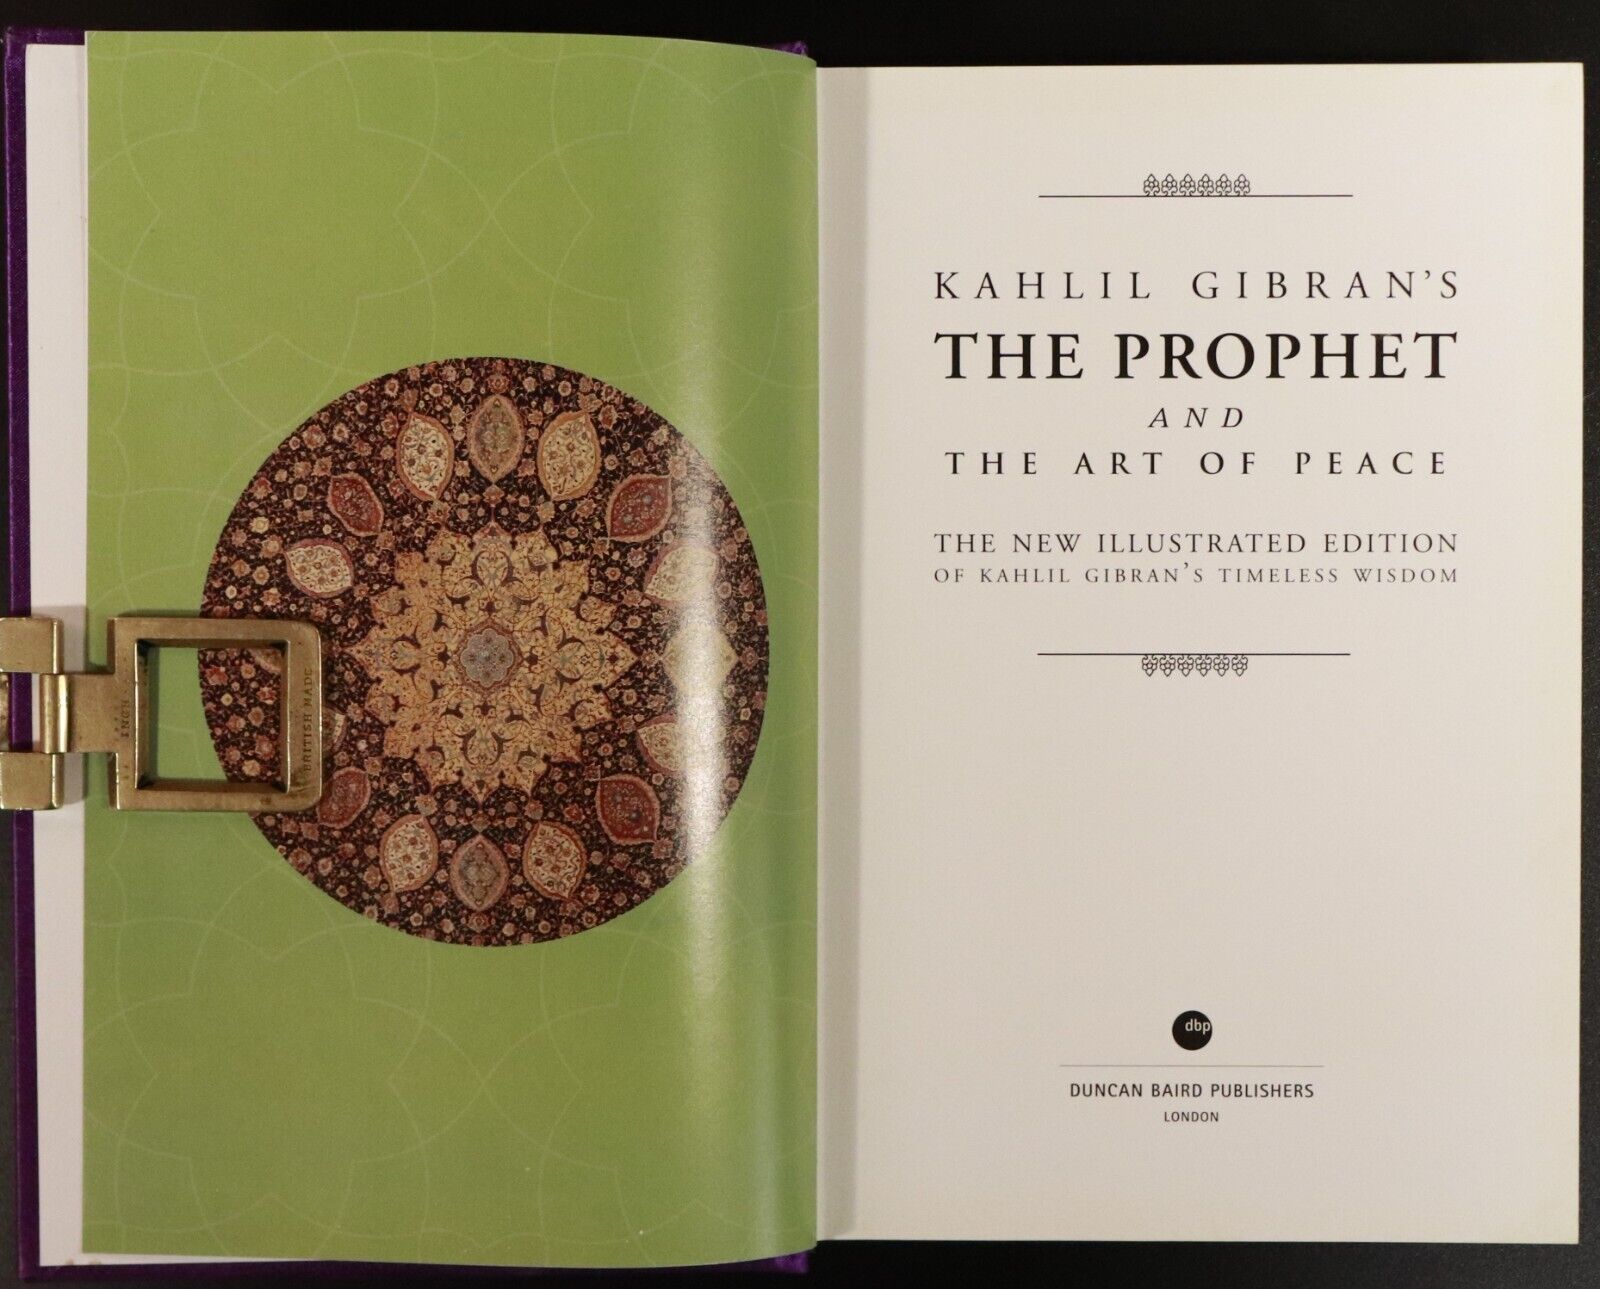 2008 The Prophet & The Art Of Peace by Kahlil Gibran Illustrated Philosophy Book - 0